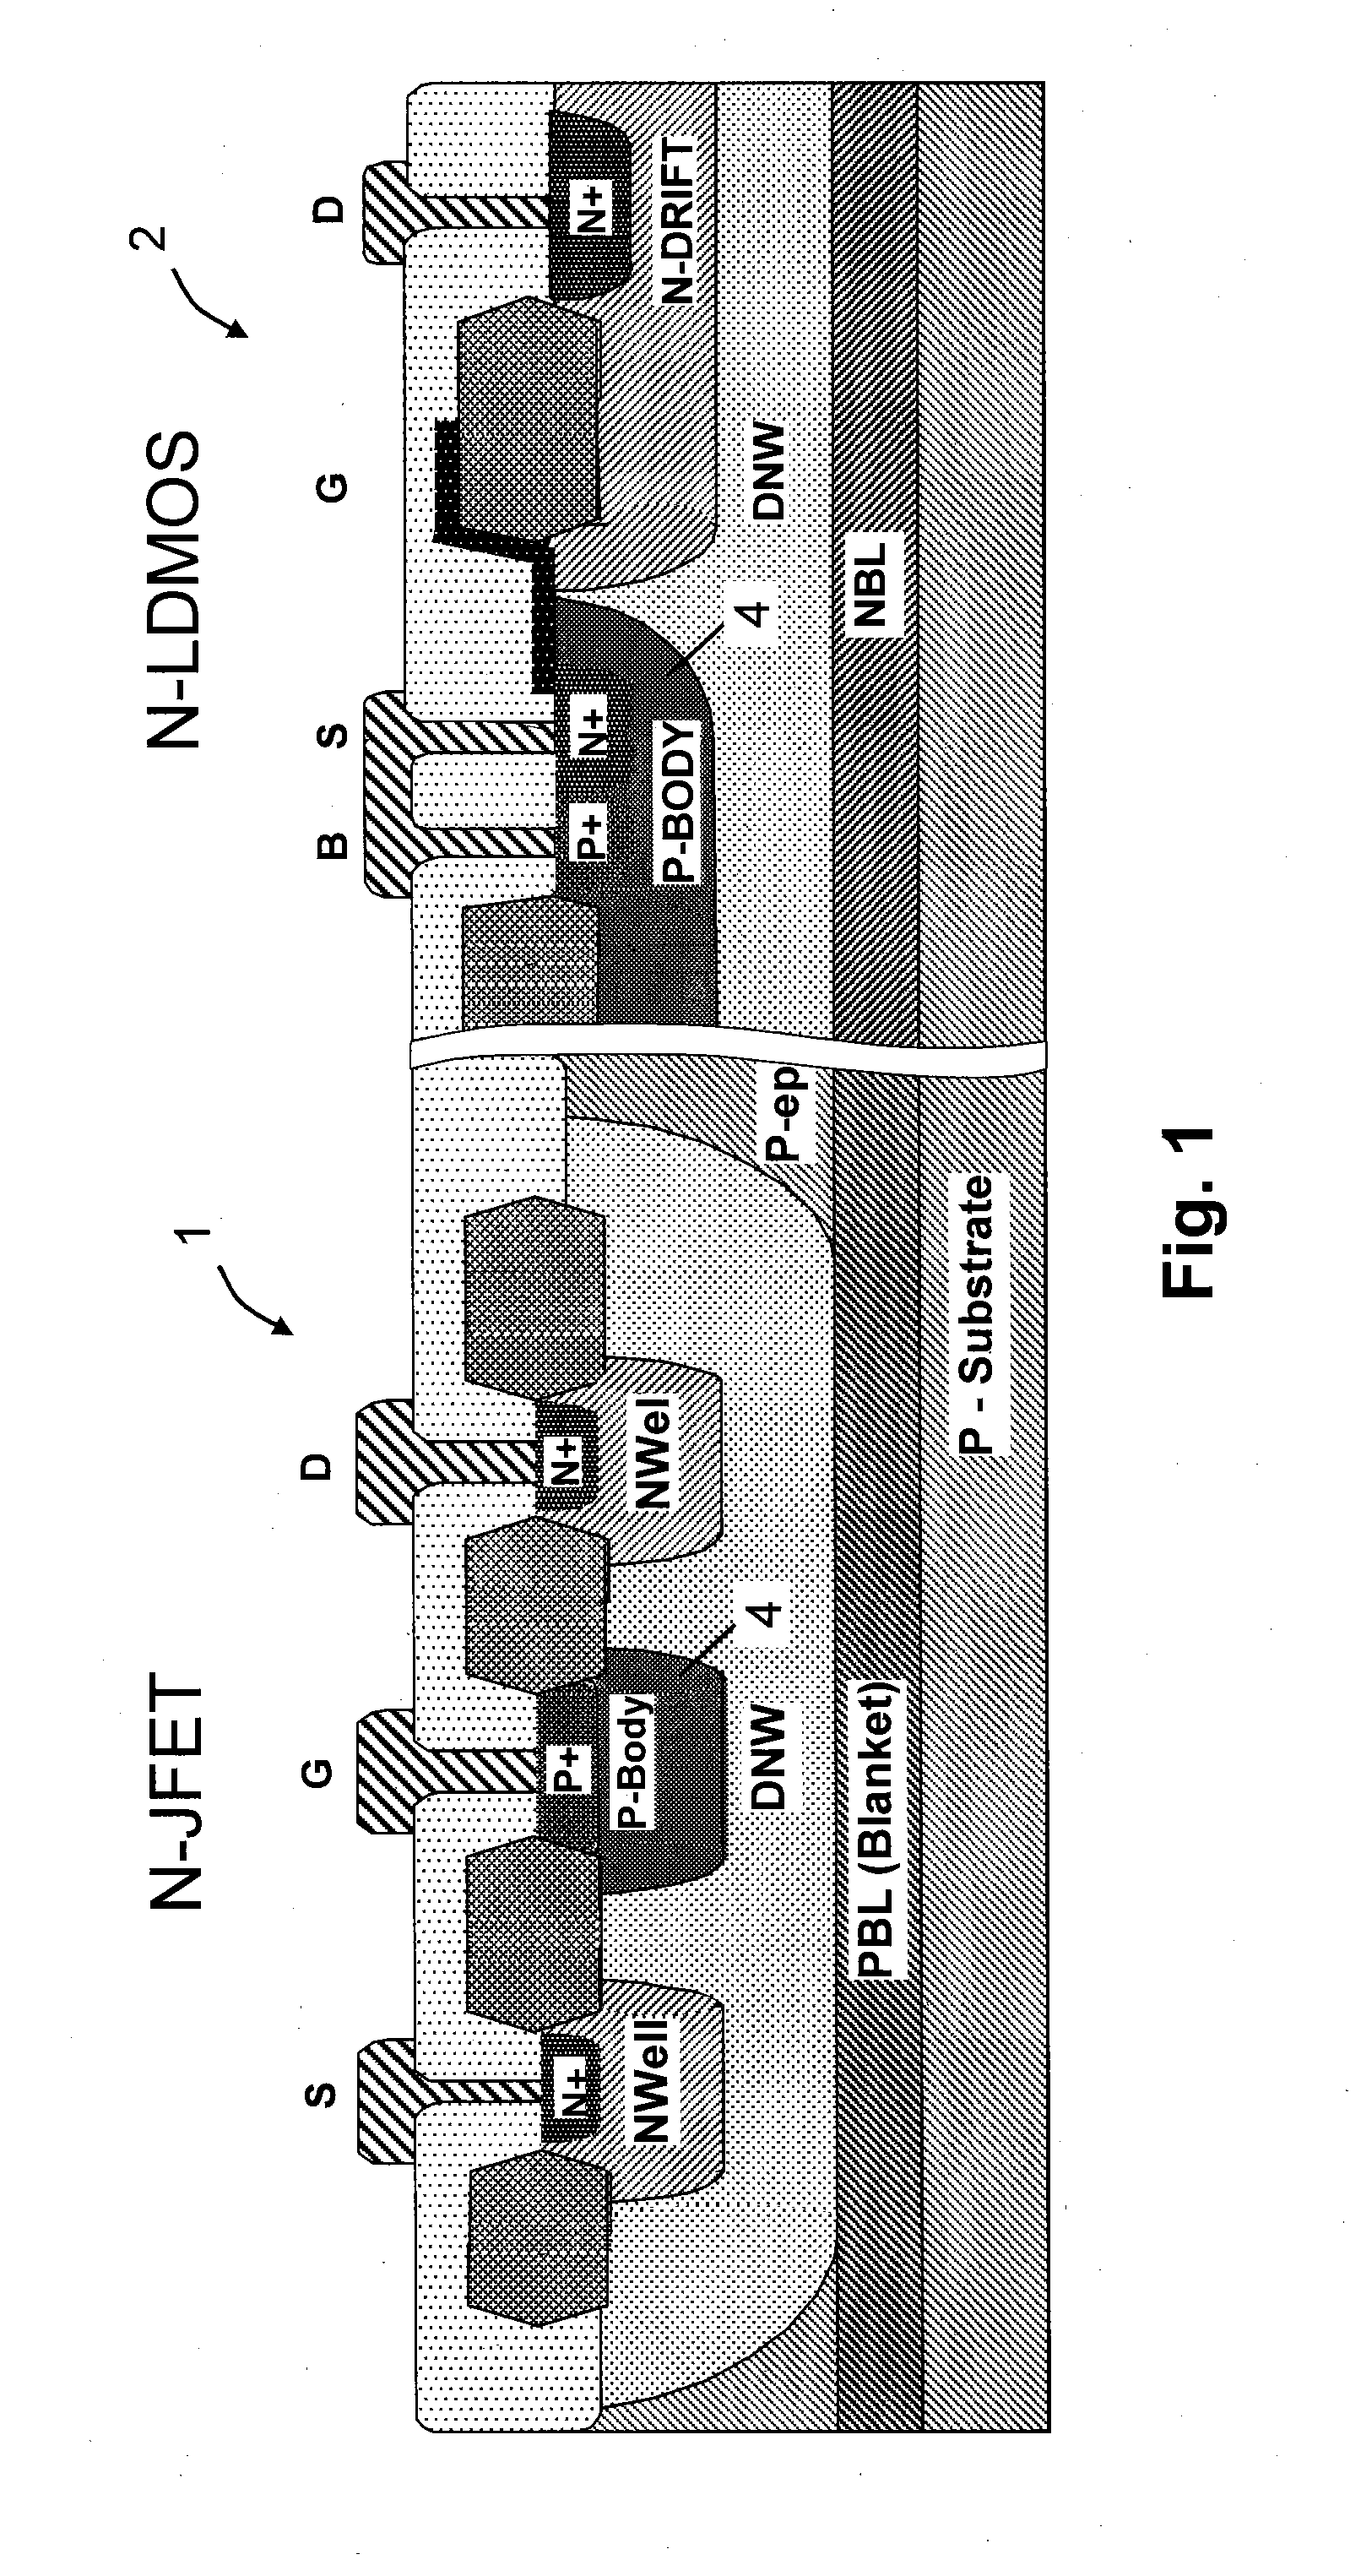 Forming jfet and ldmos transistor in monolithic power integrated circuit using deep diffusion regions